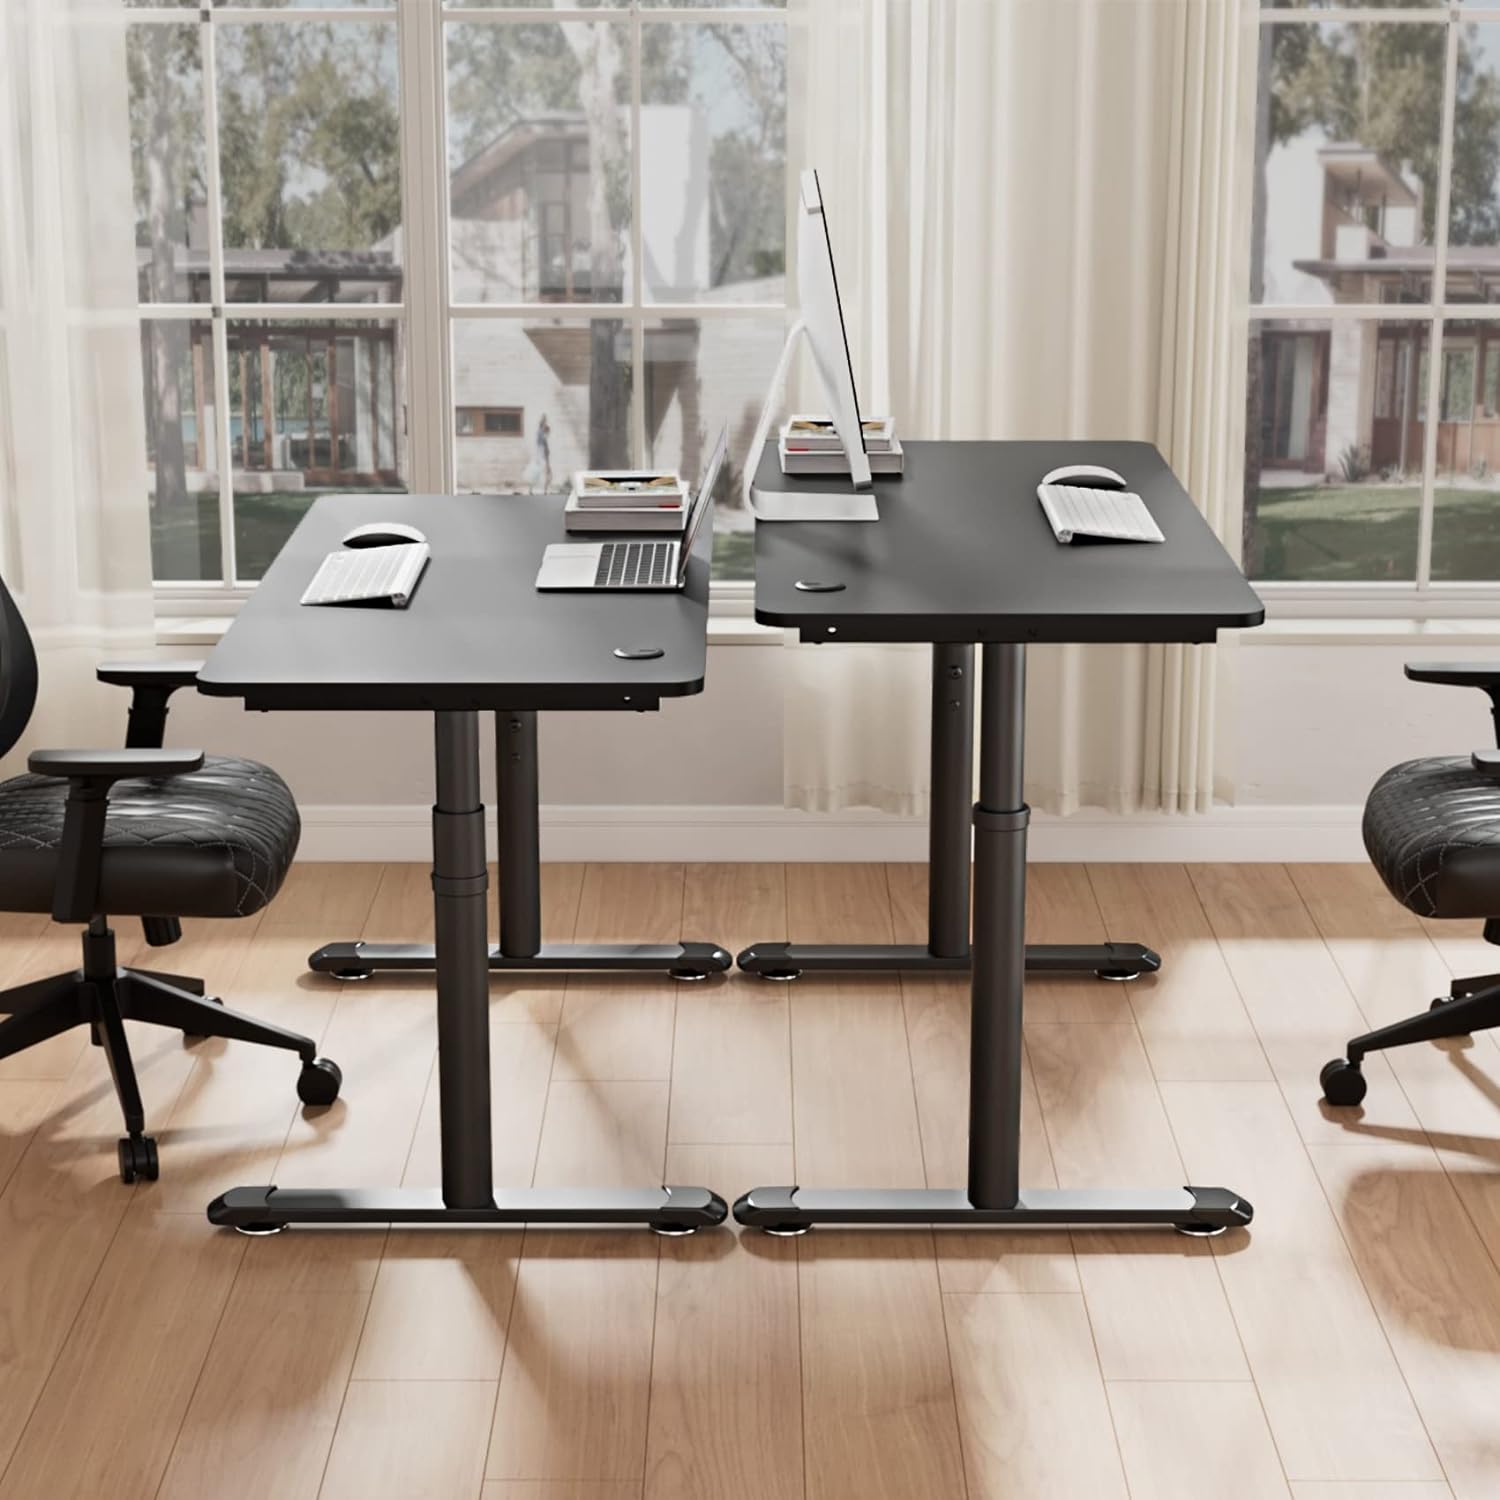 Eureka Ergonomic Office Table- Height Adjustable, 60 Inches with Free Large Mousepad